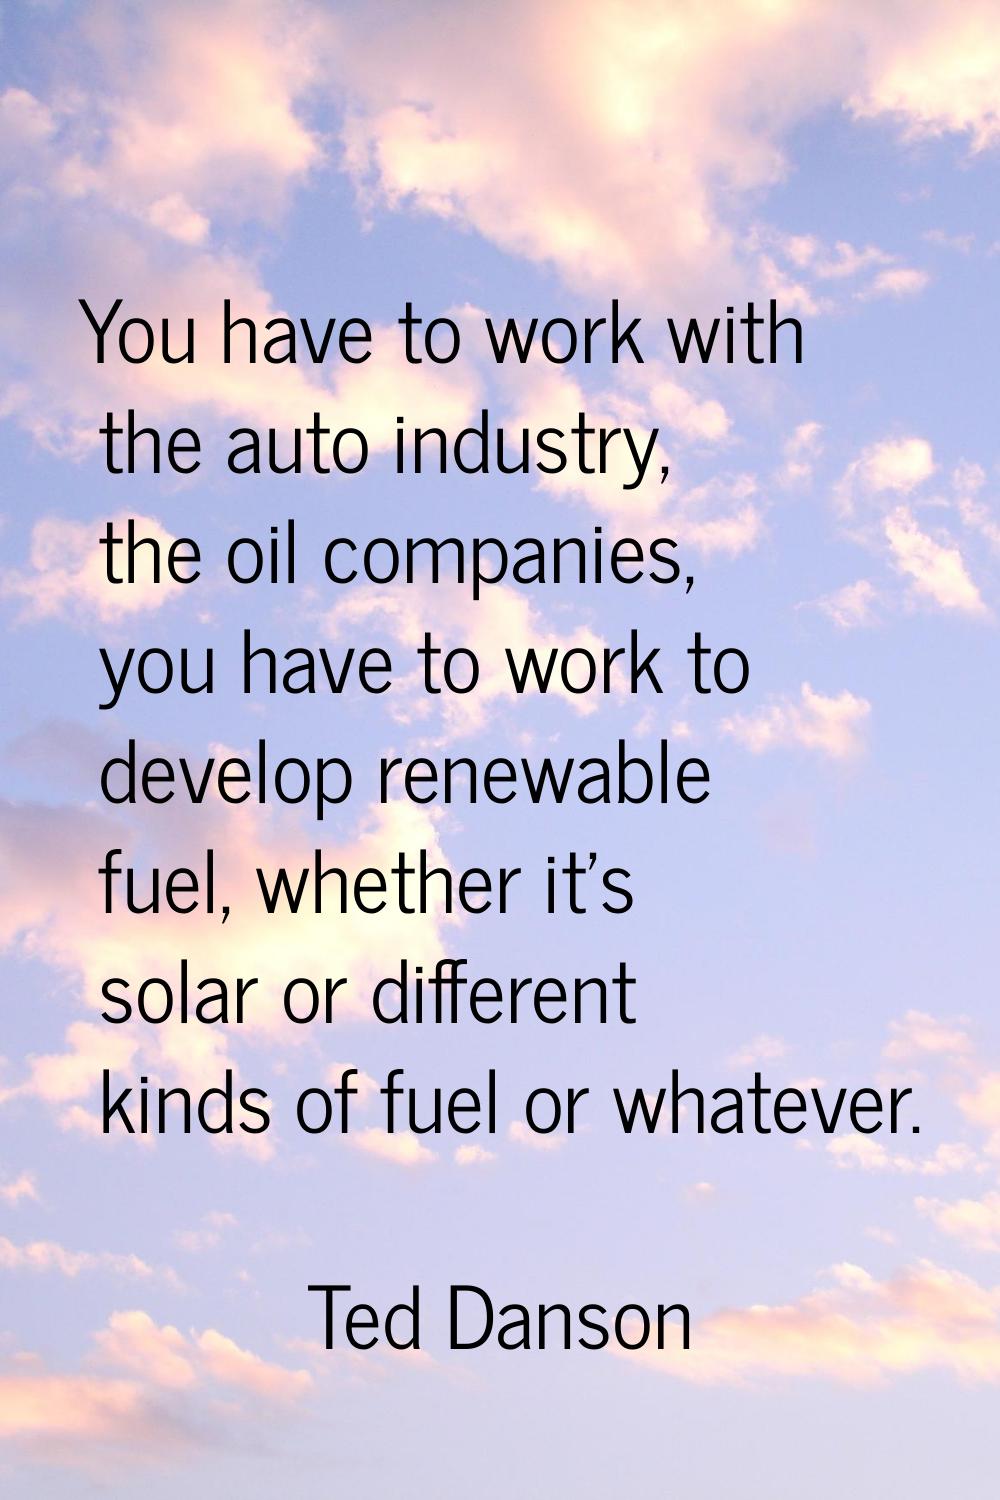 You have to work with the auto industry, the oil companies, you have to work to develop renewable f